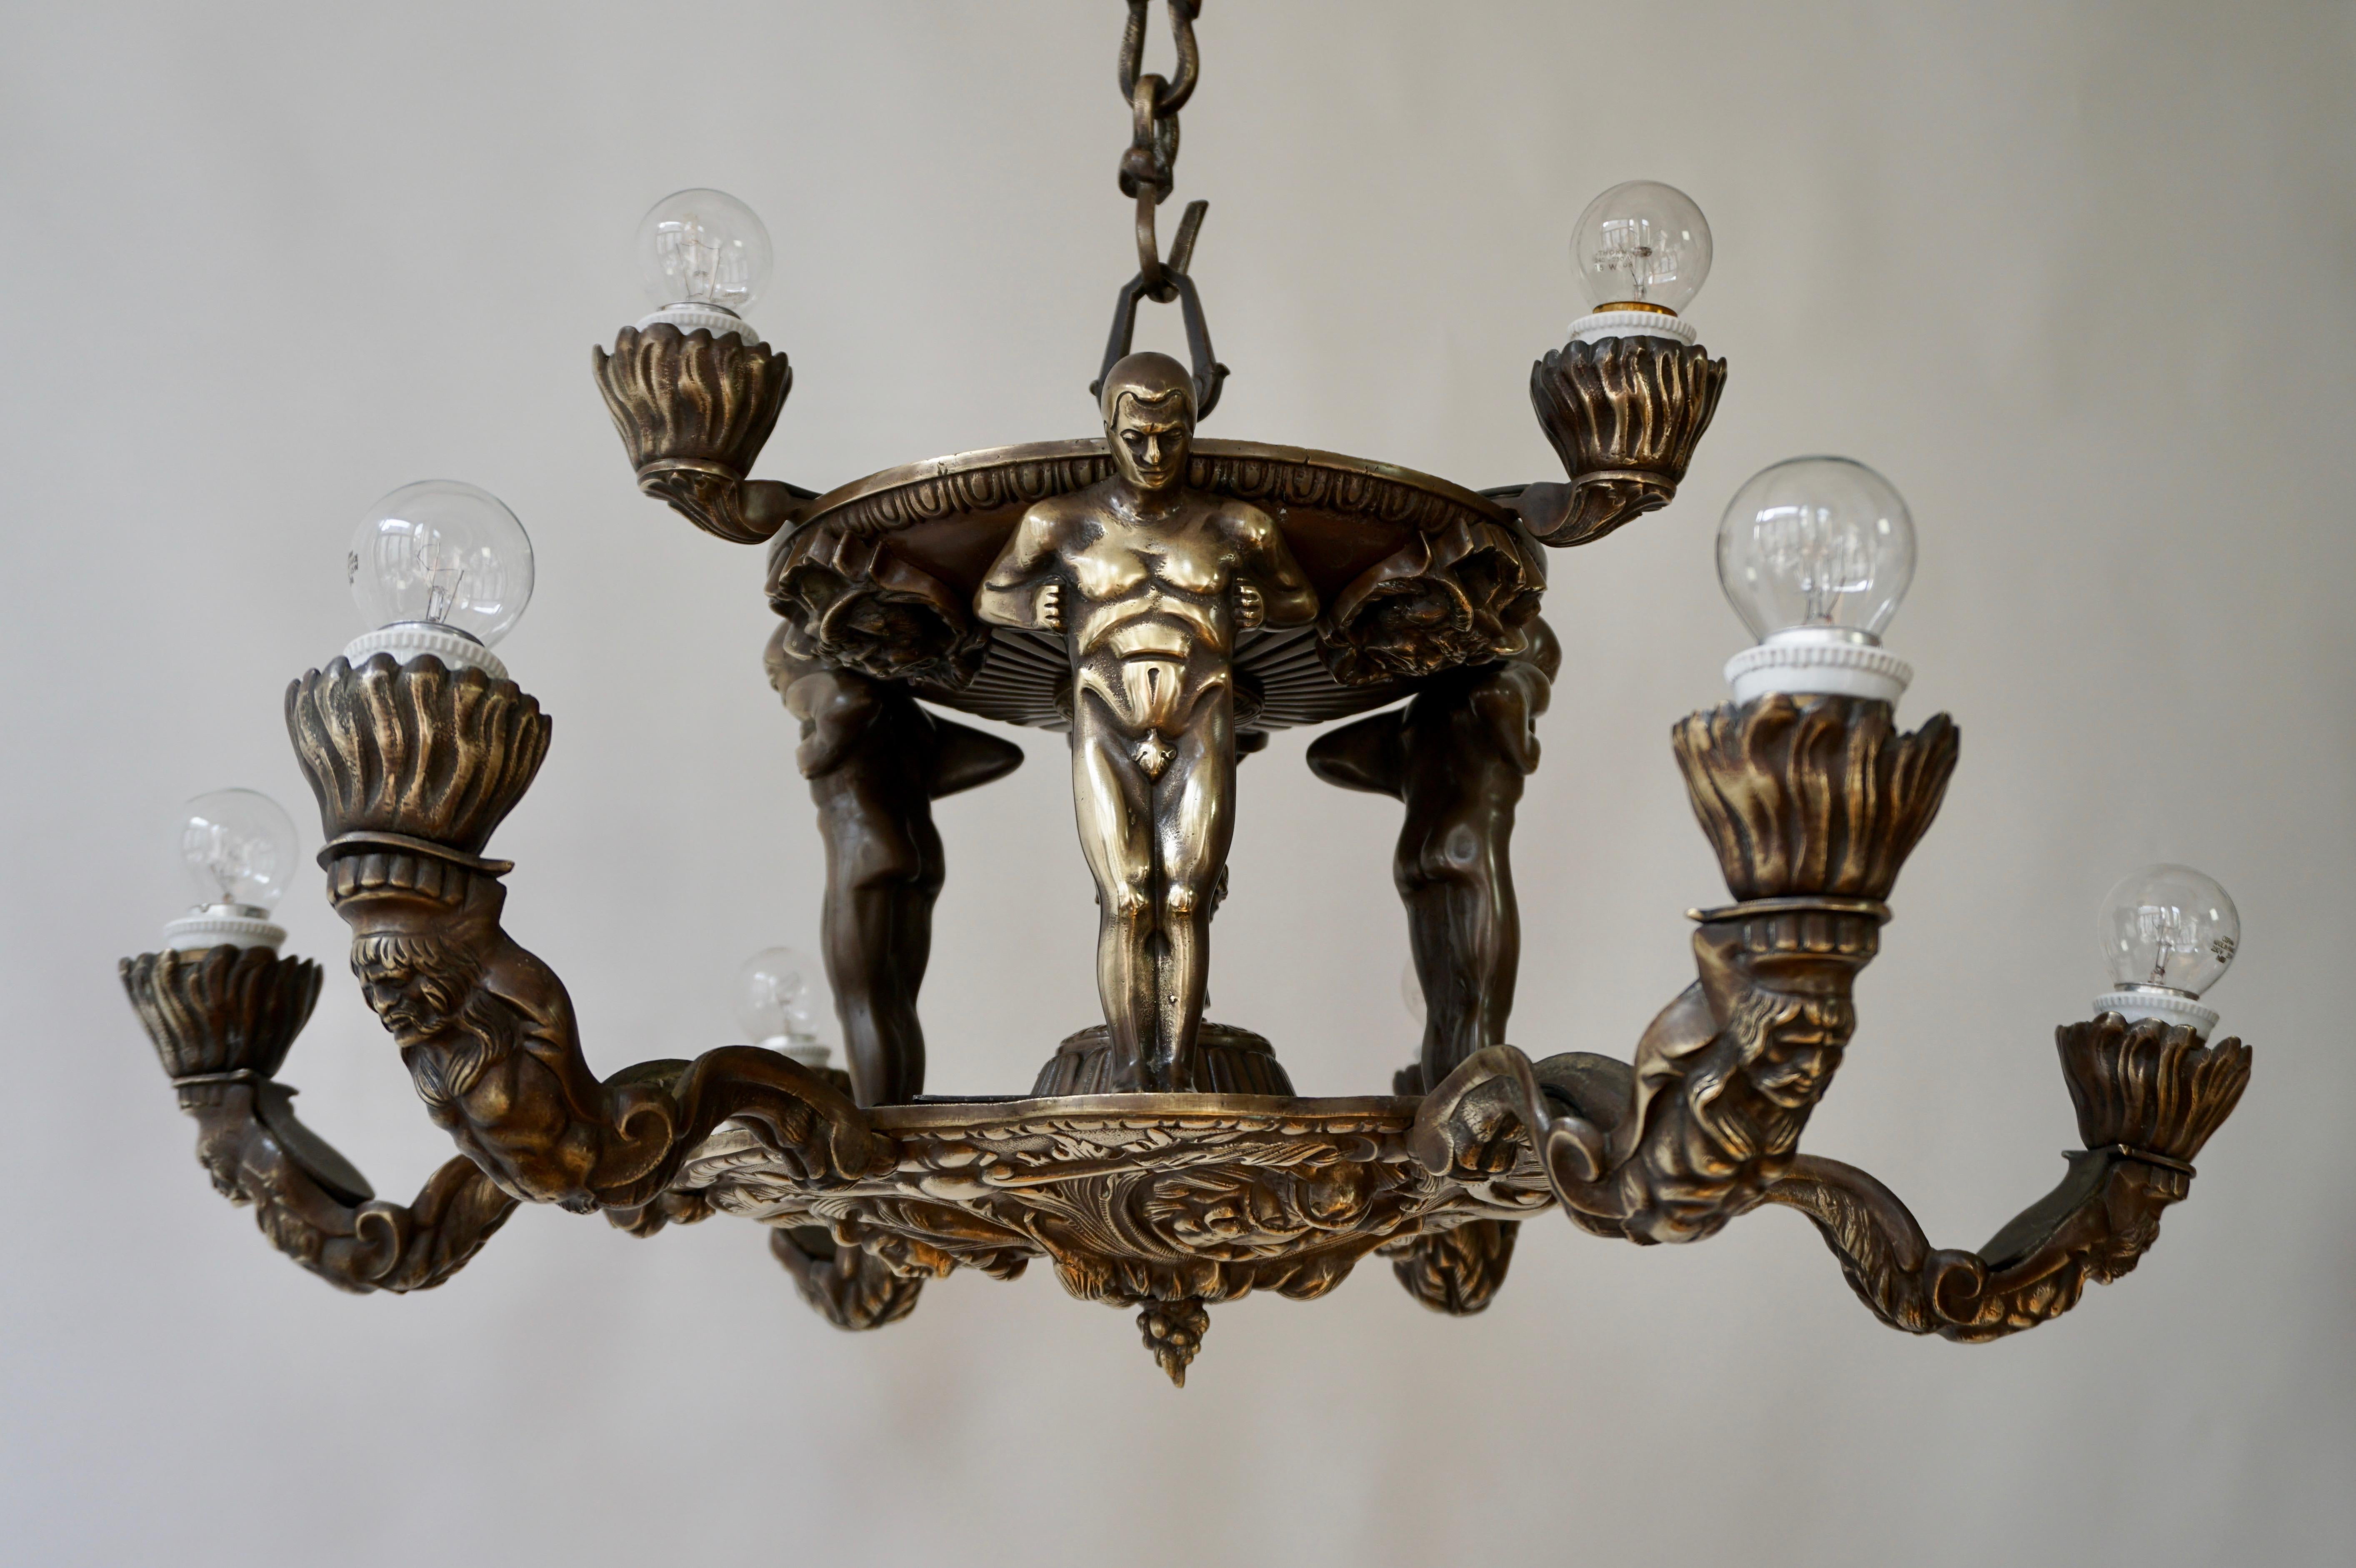 A remarkable two tier bronze six light French Hollywood Regency chandelier, the upper part inspired by Wiener Werkstätte Art Deco designs showing three male nude figures supporting a fountainlike structure, the lower part decorated with medallions